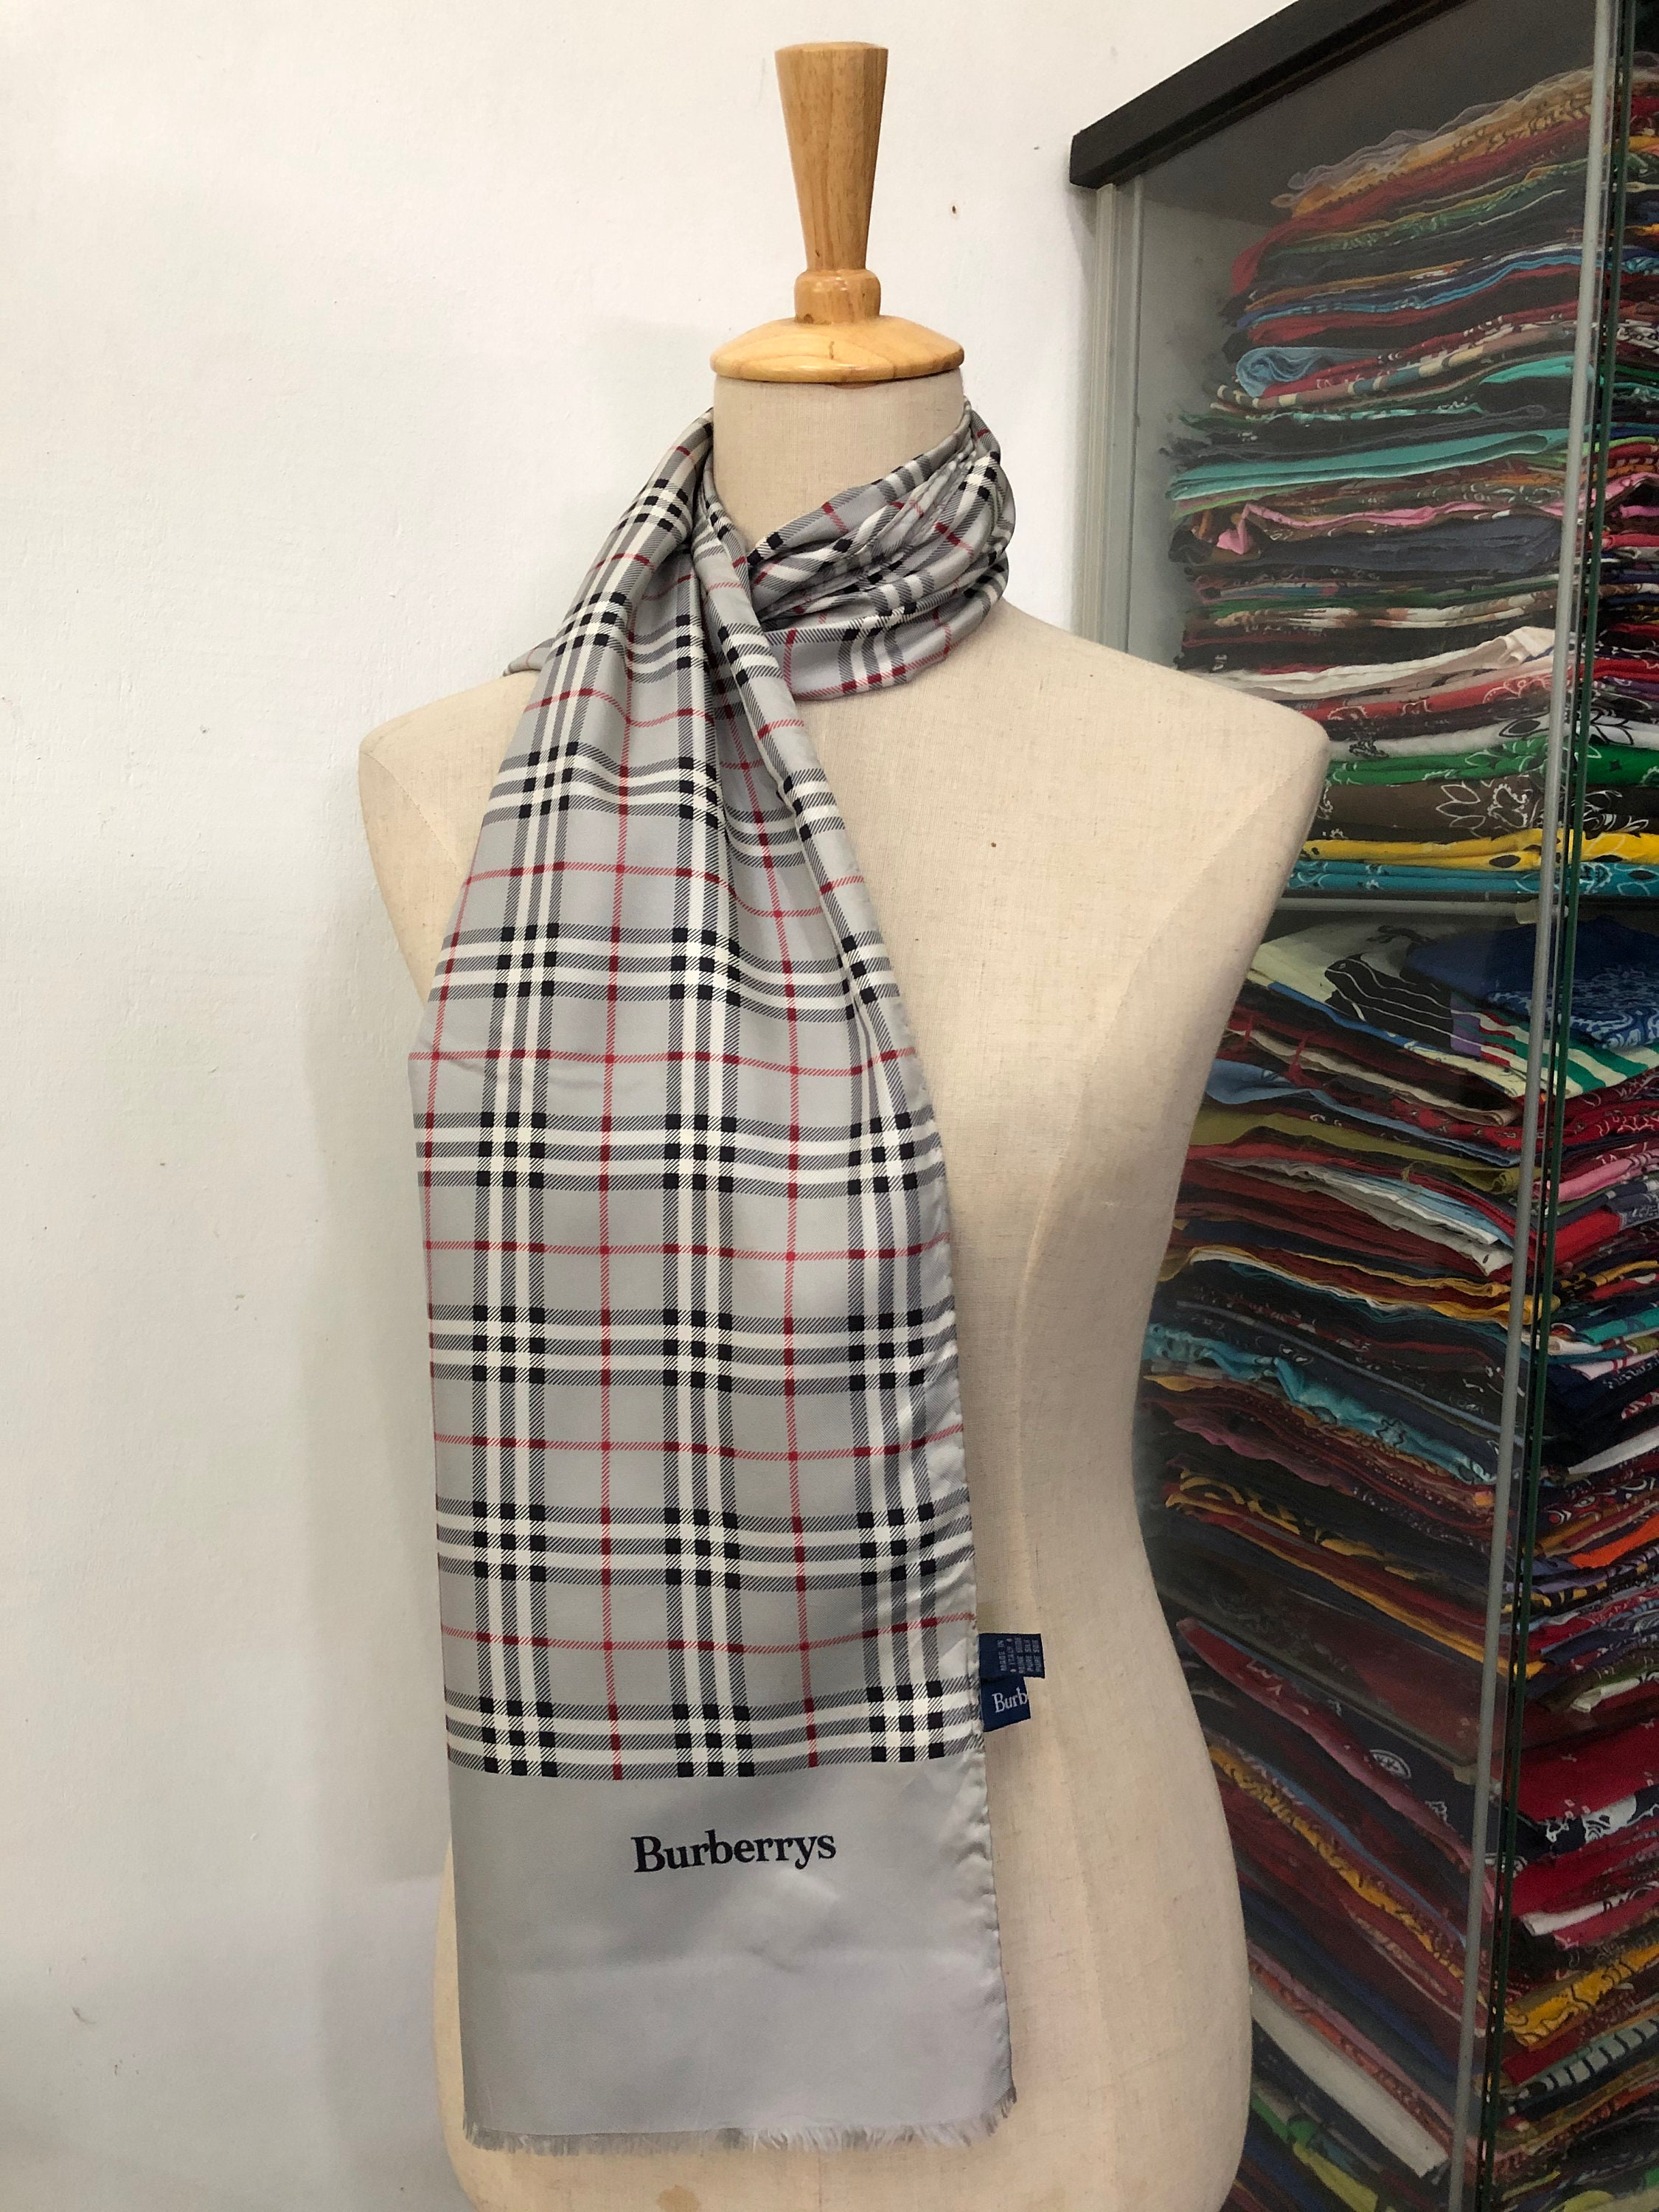 Burberry, Accessories, Additional Burb Scarf Pics